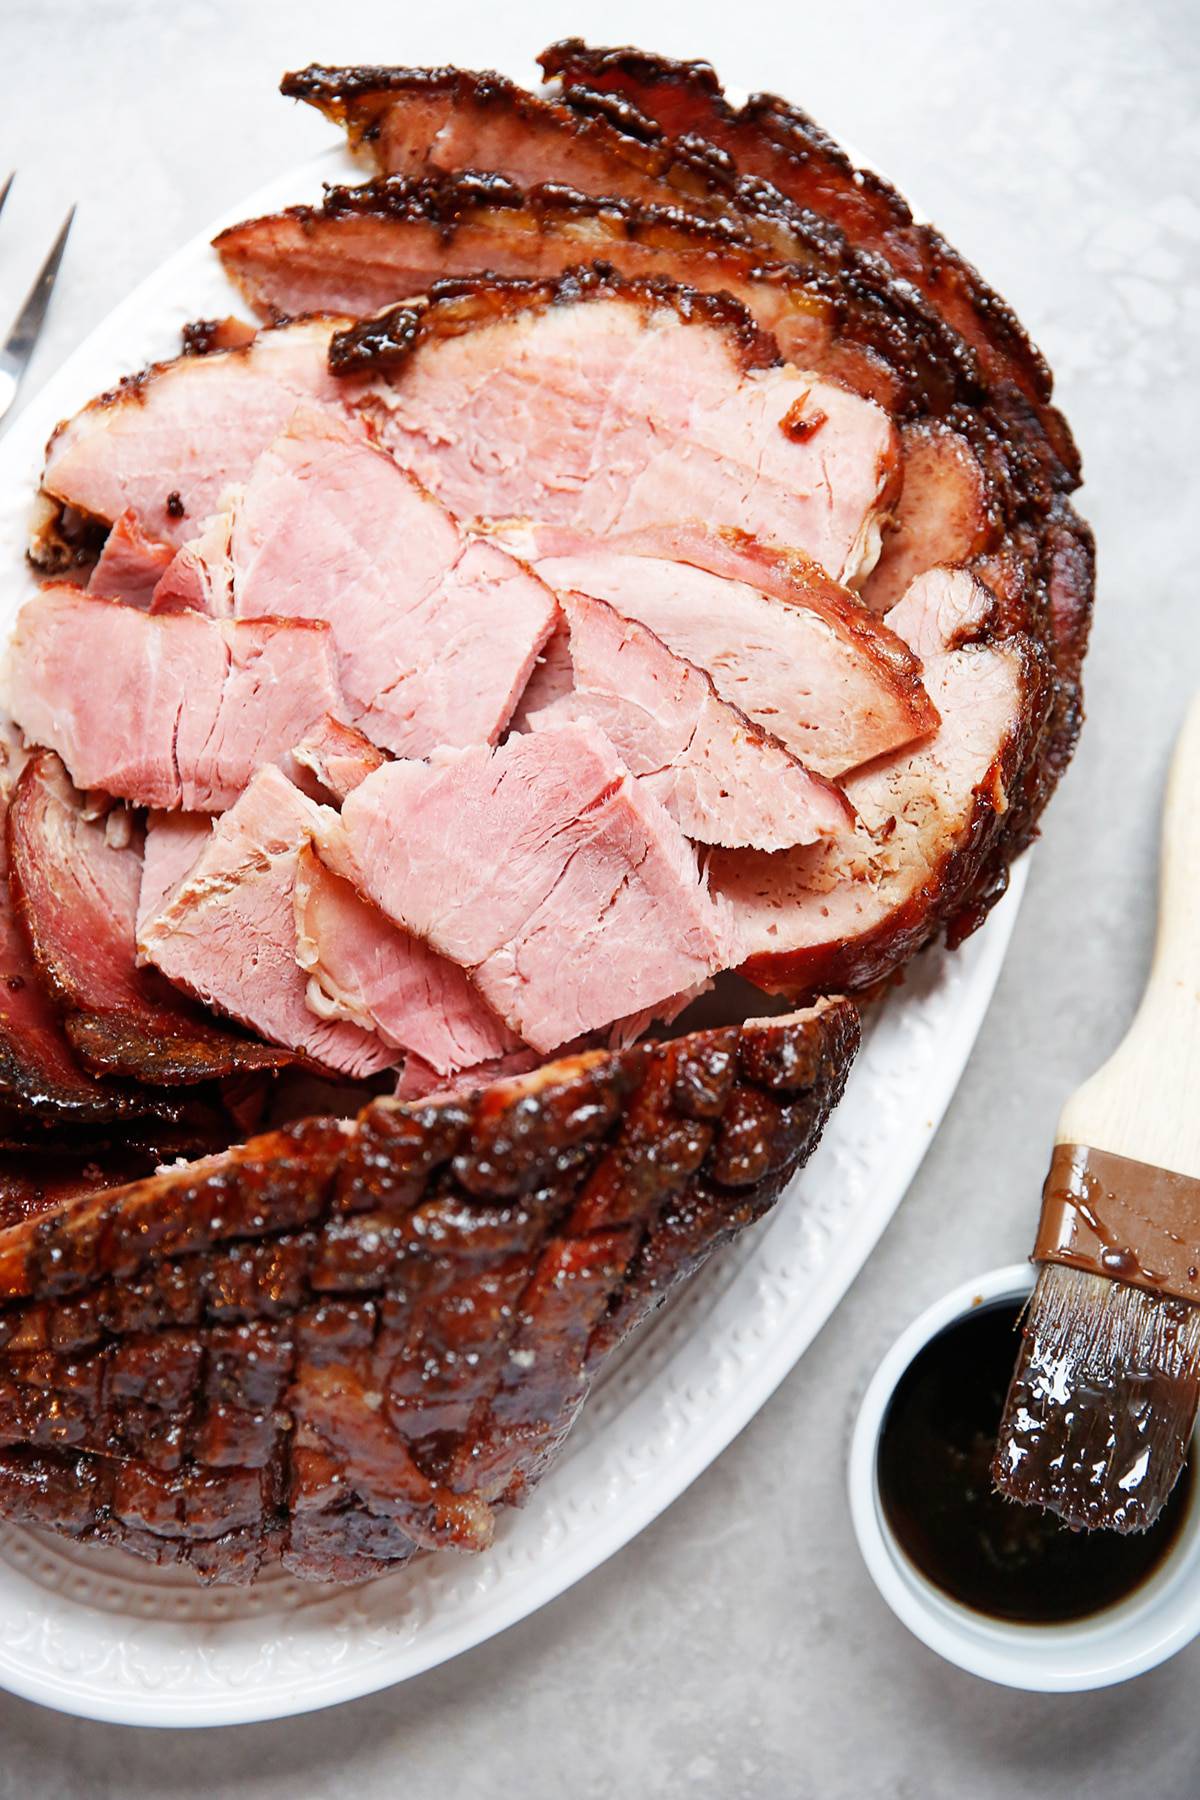 A simple baked ham recipe sliced and ready to eat